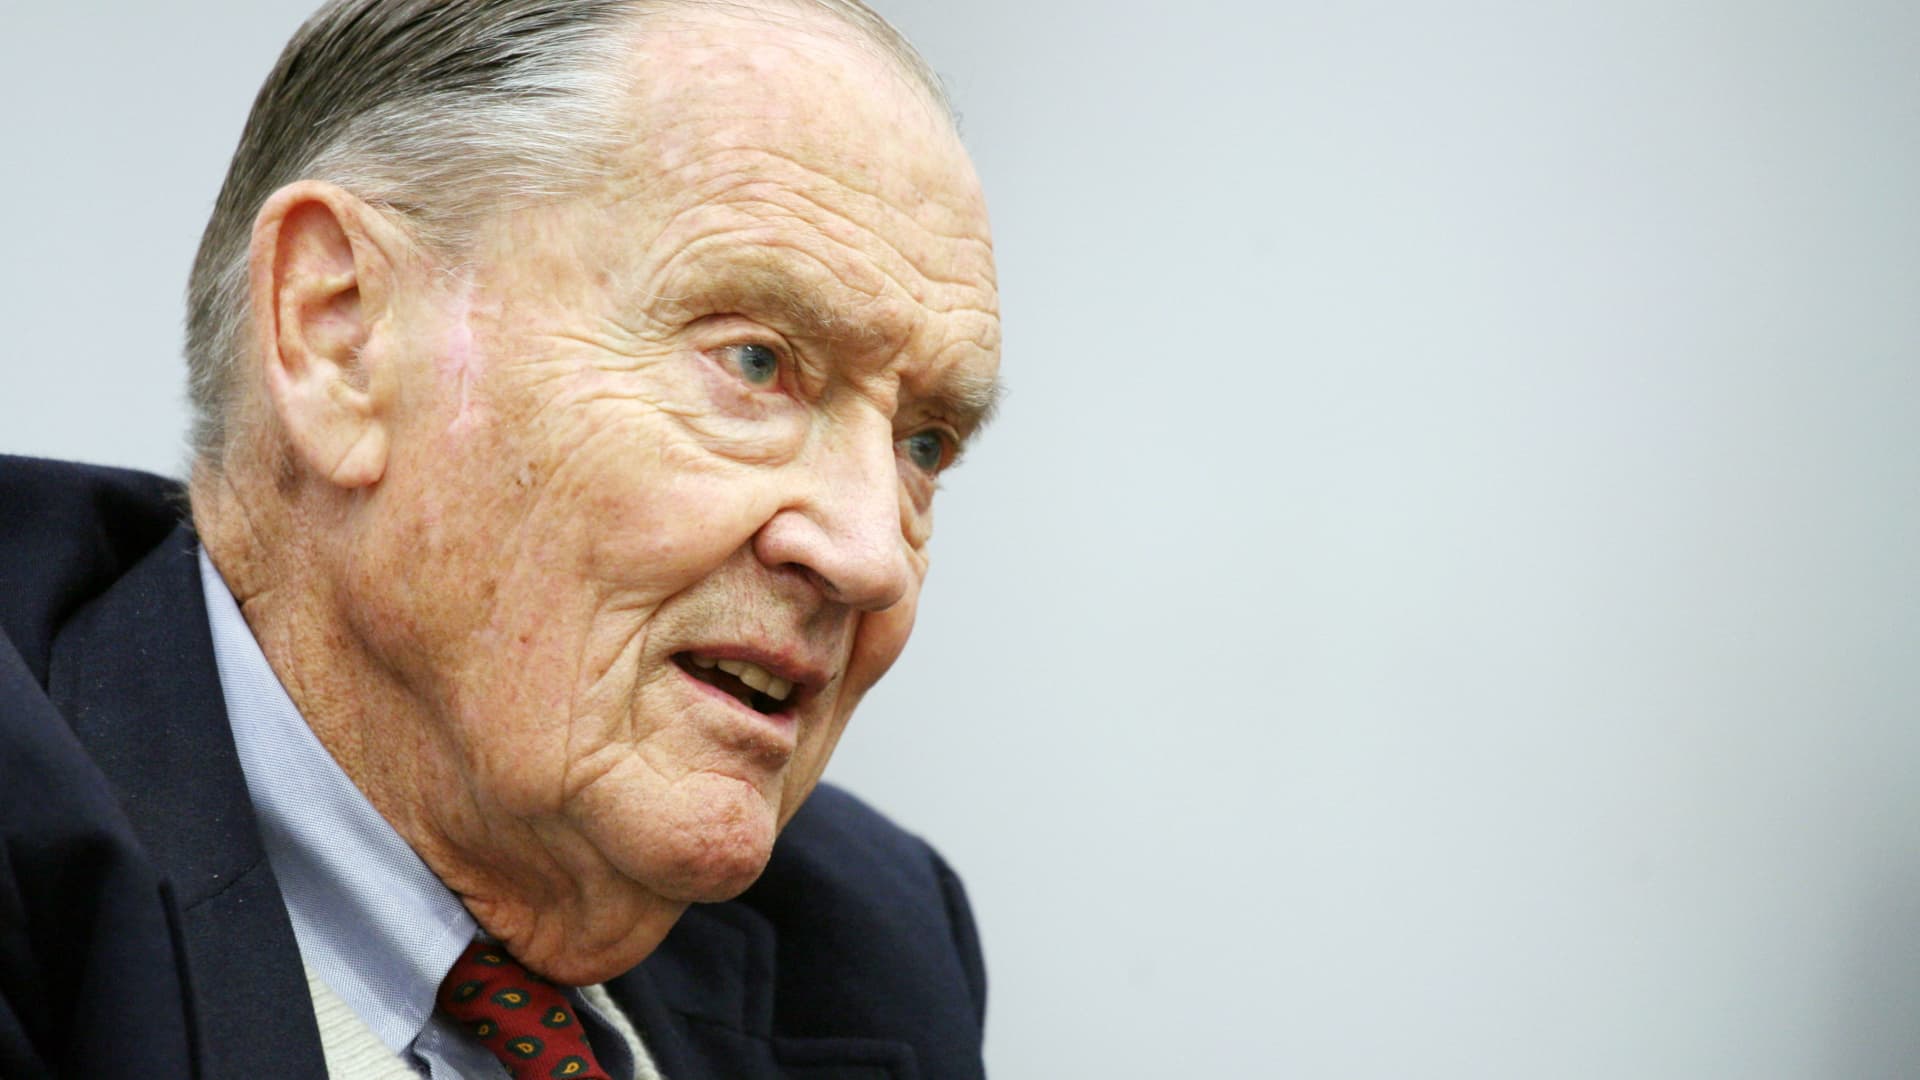 ‘T-bill and chill’: Why Jack Bogle’s strategy of ‘lazy’ investing is making a comeback